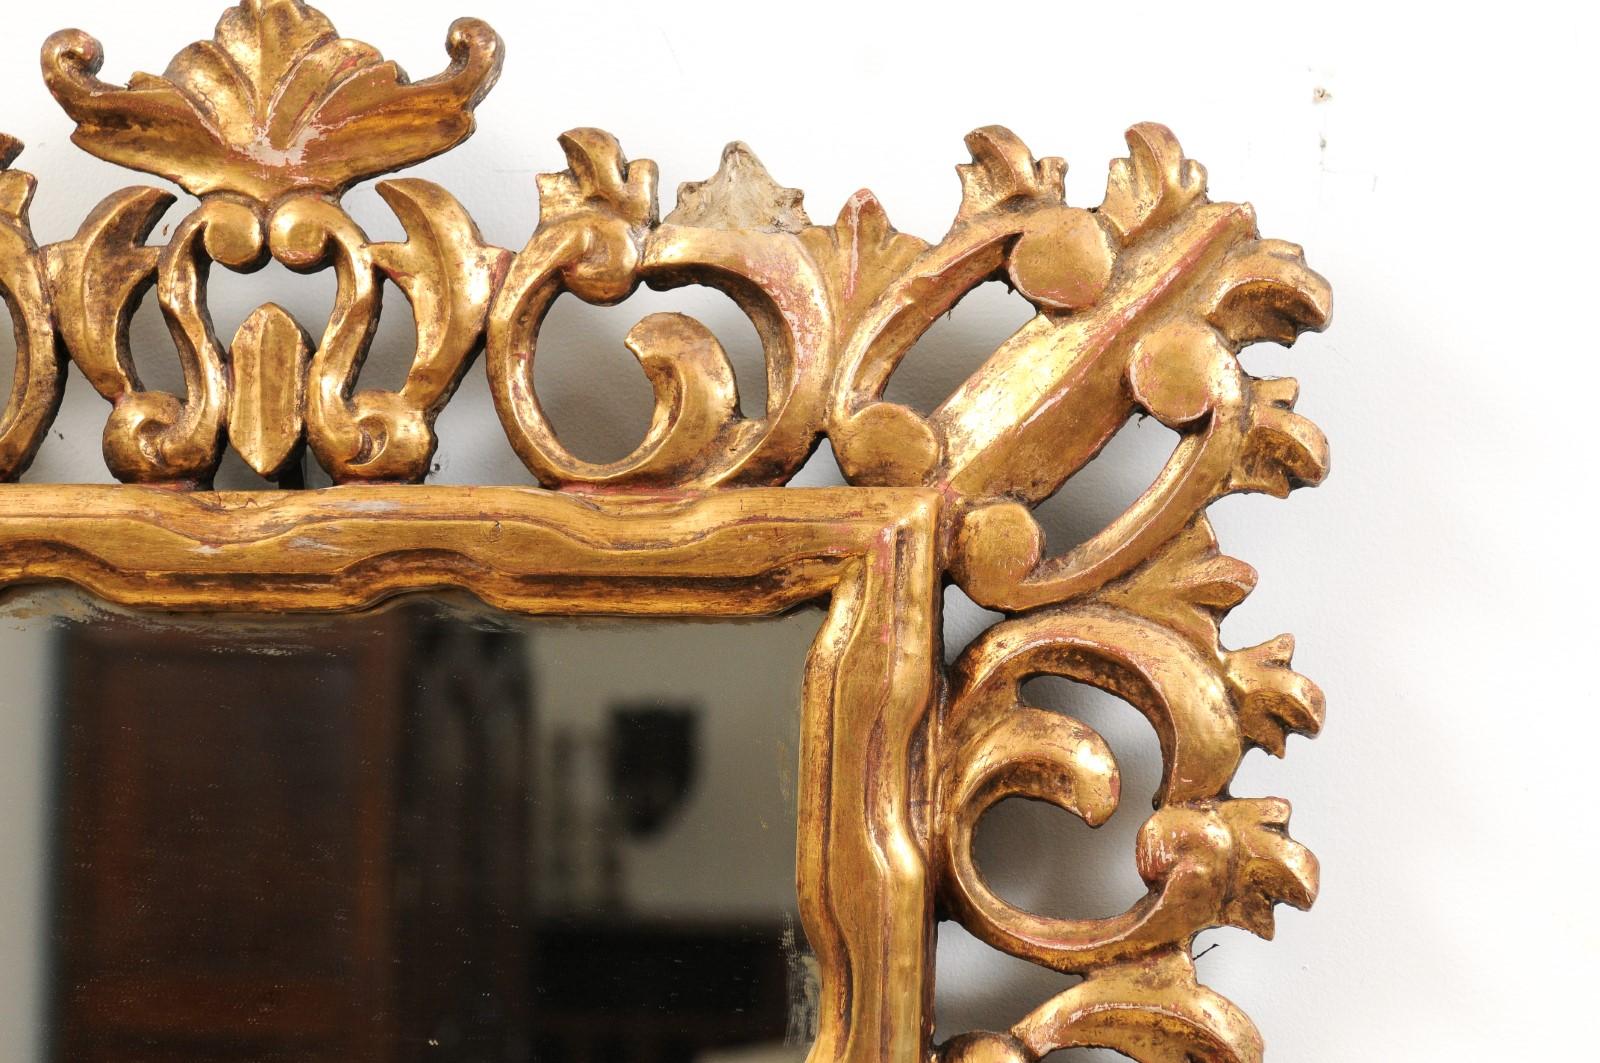 Florentine 20th Century Carved Giltwood Mirror with C-Scrolls and Foliage Motifs 2